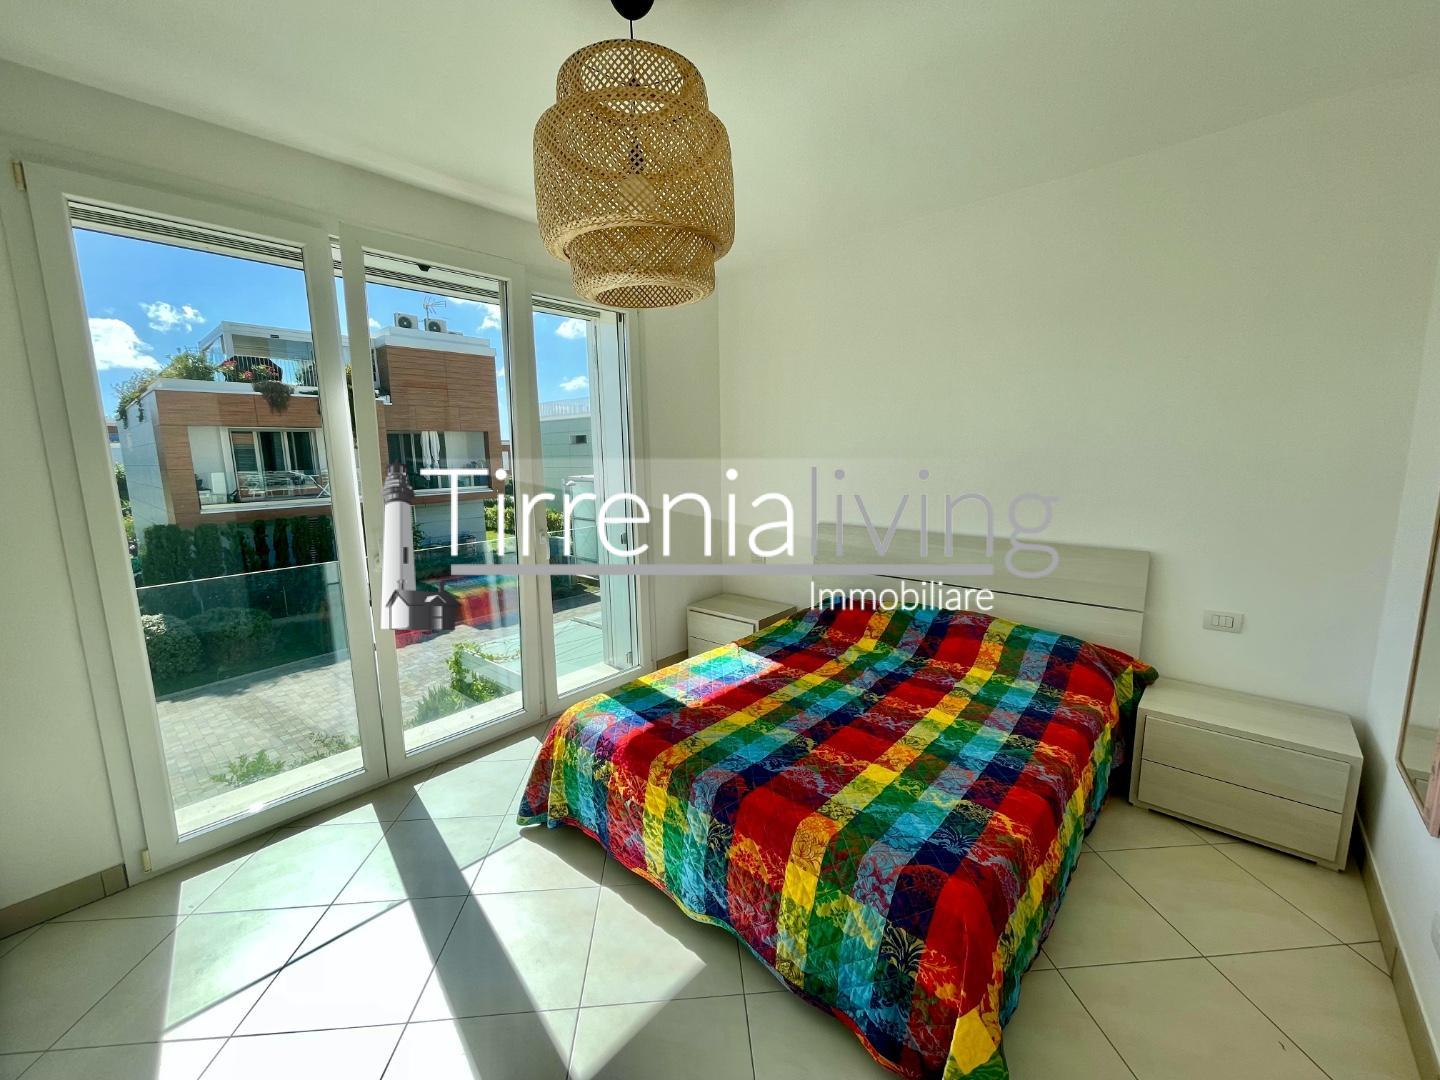 Apartment for holiday rentals, ref. A-534-e